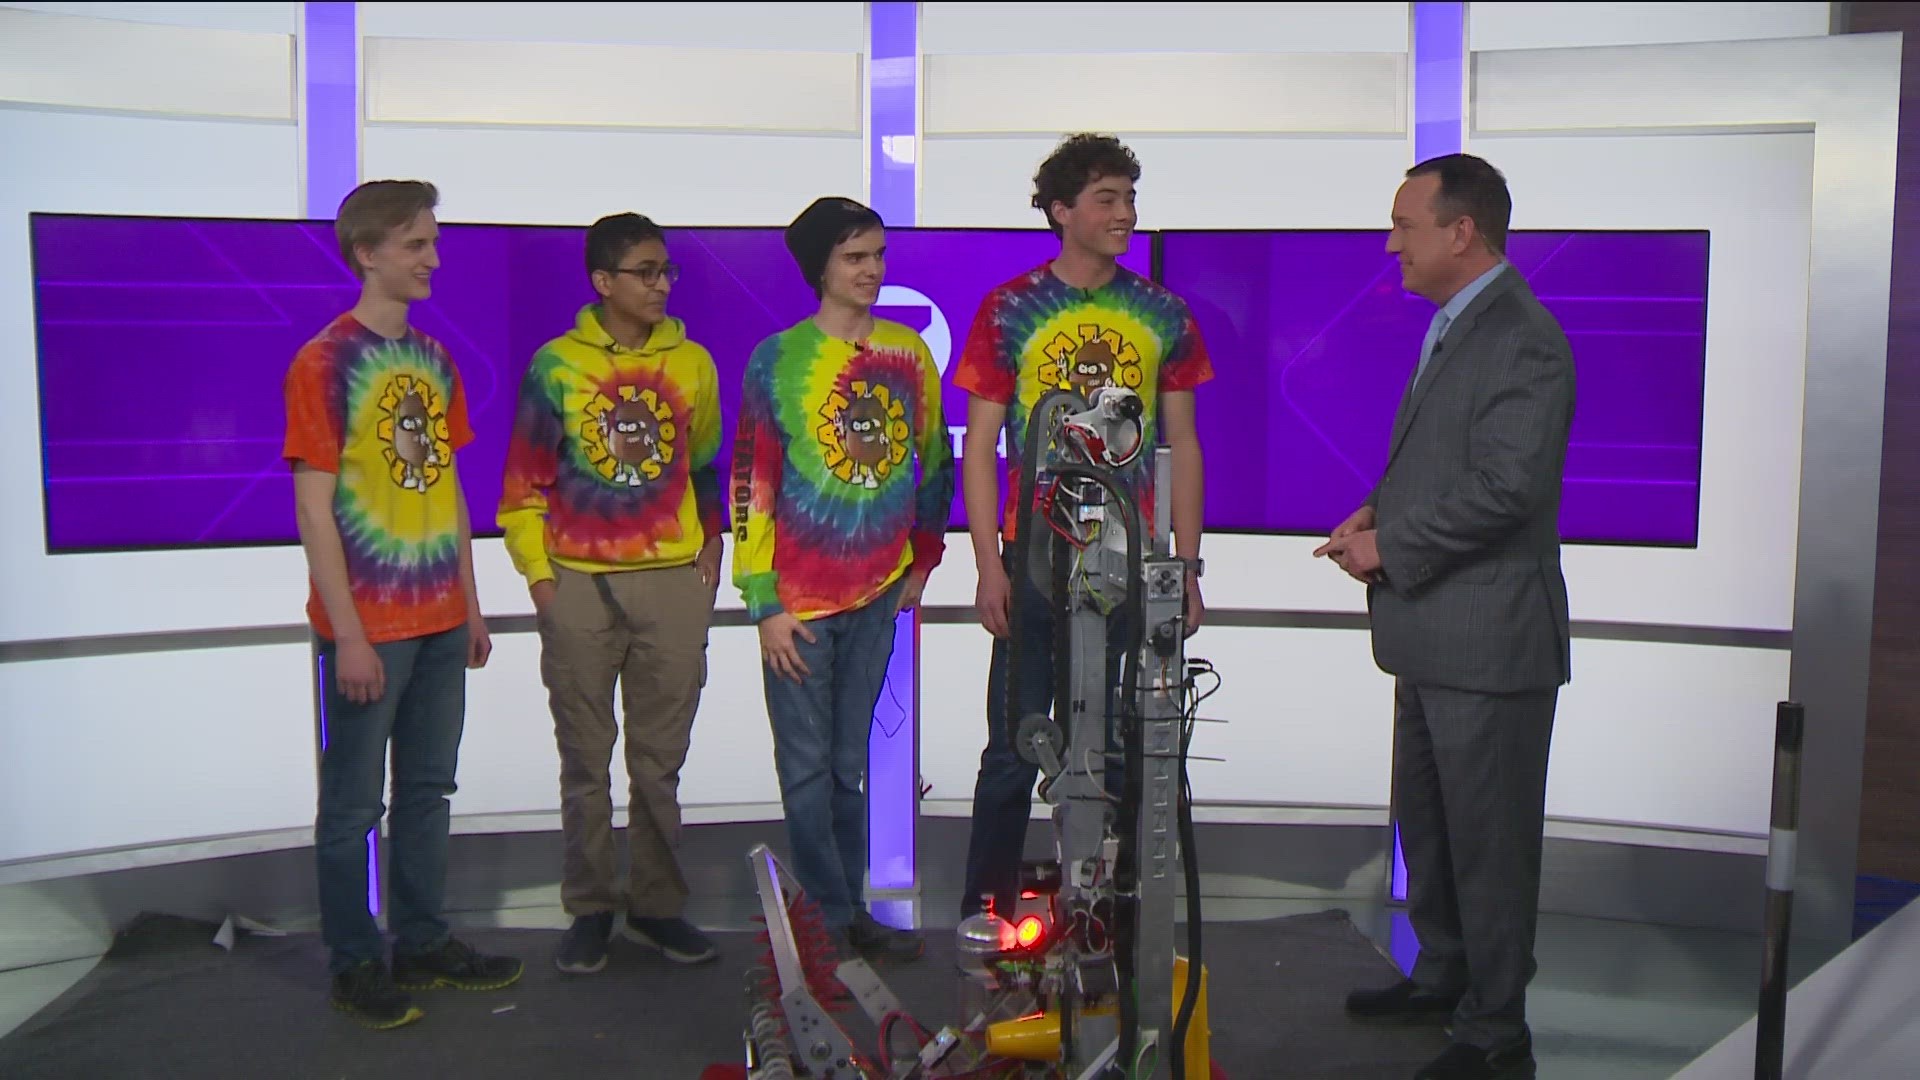 A Treasure Valley robotics team placed 2nd at two regional competitions in Utah and Arizona. Their next stop? Houston with hopes of qualifying for Nationals.